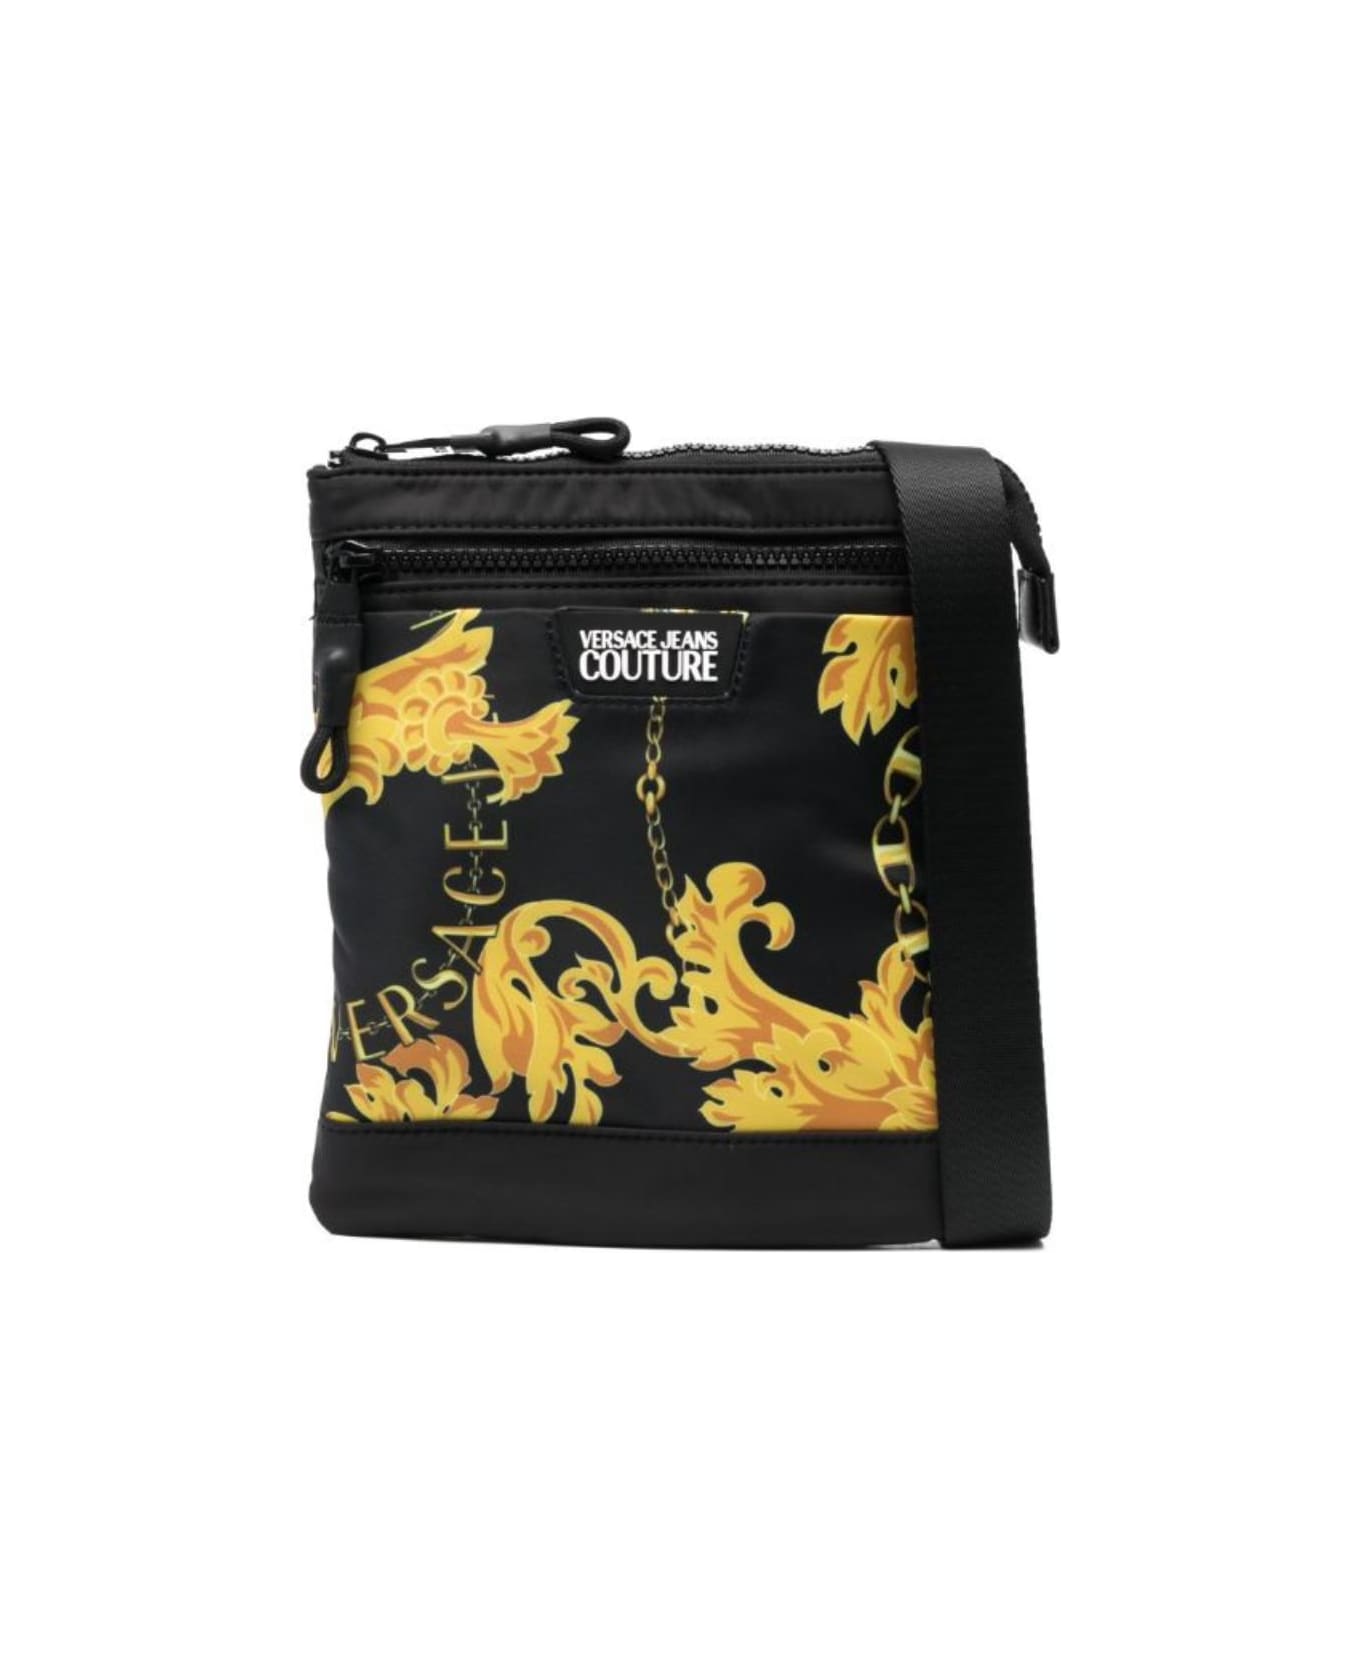 Versace Jeans Couture Bag - BLACK/GOLD バッグ